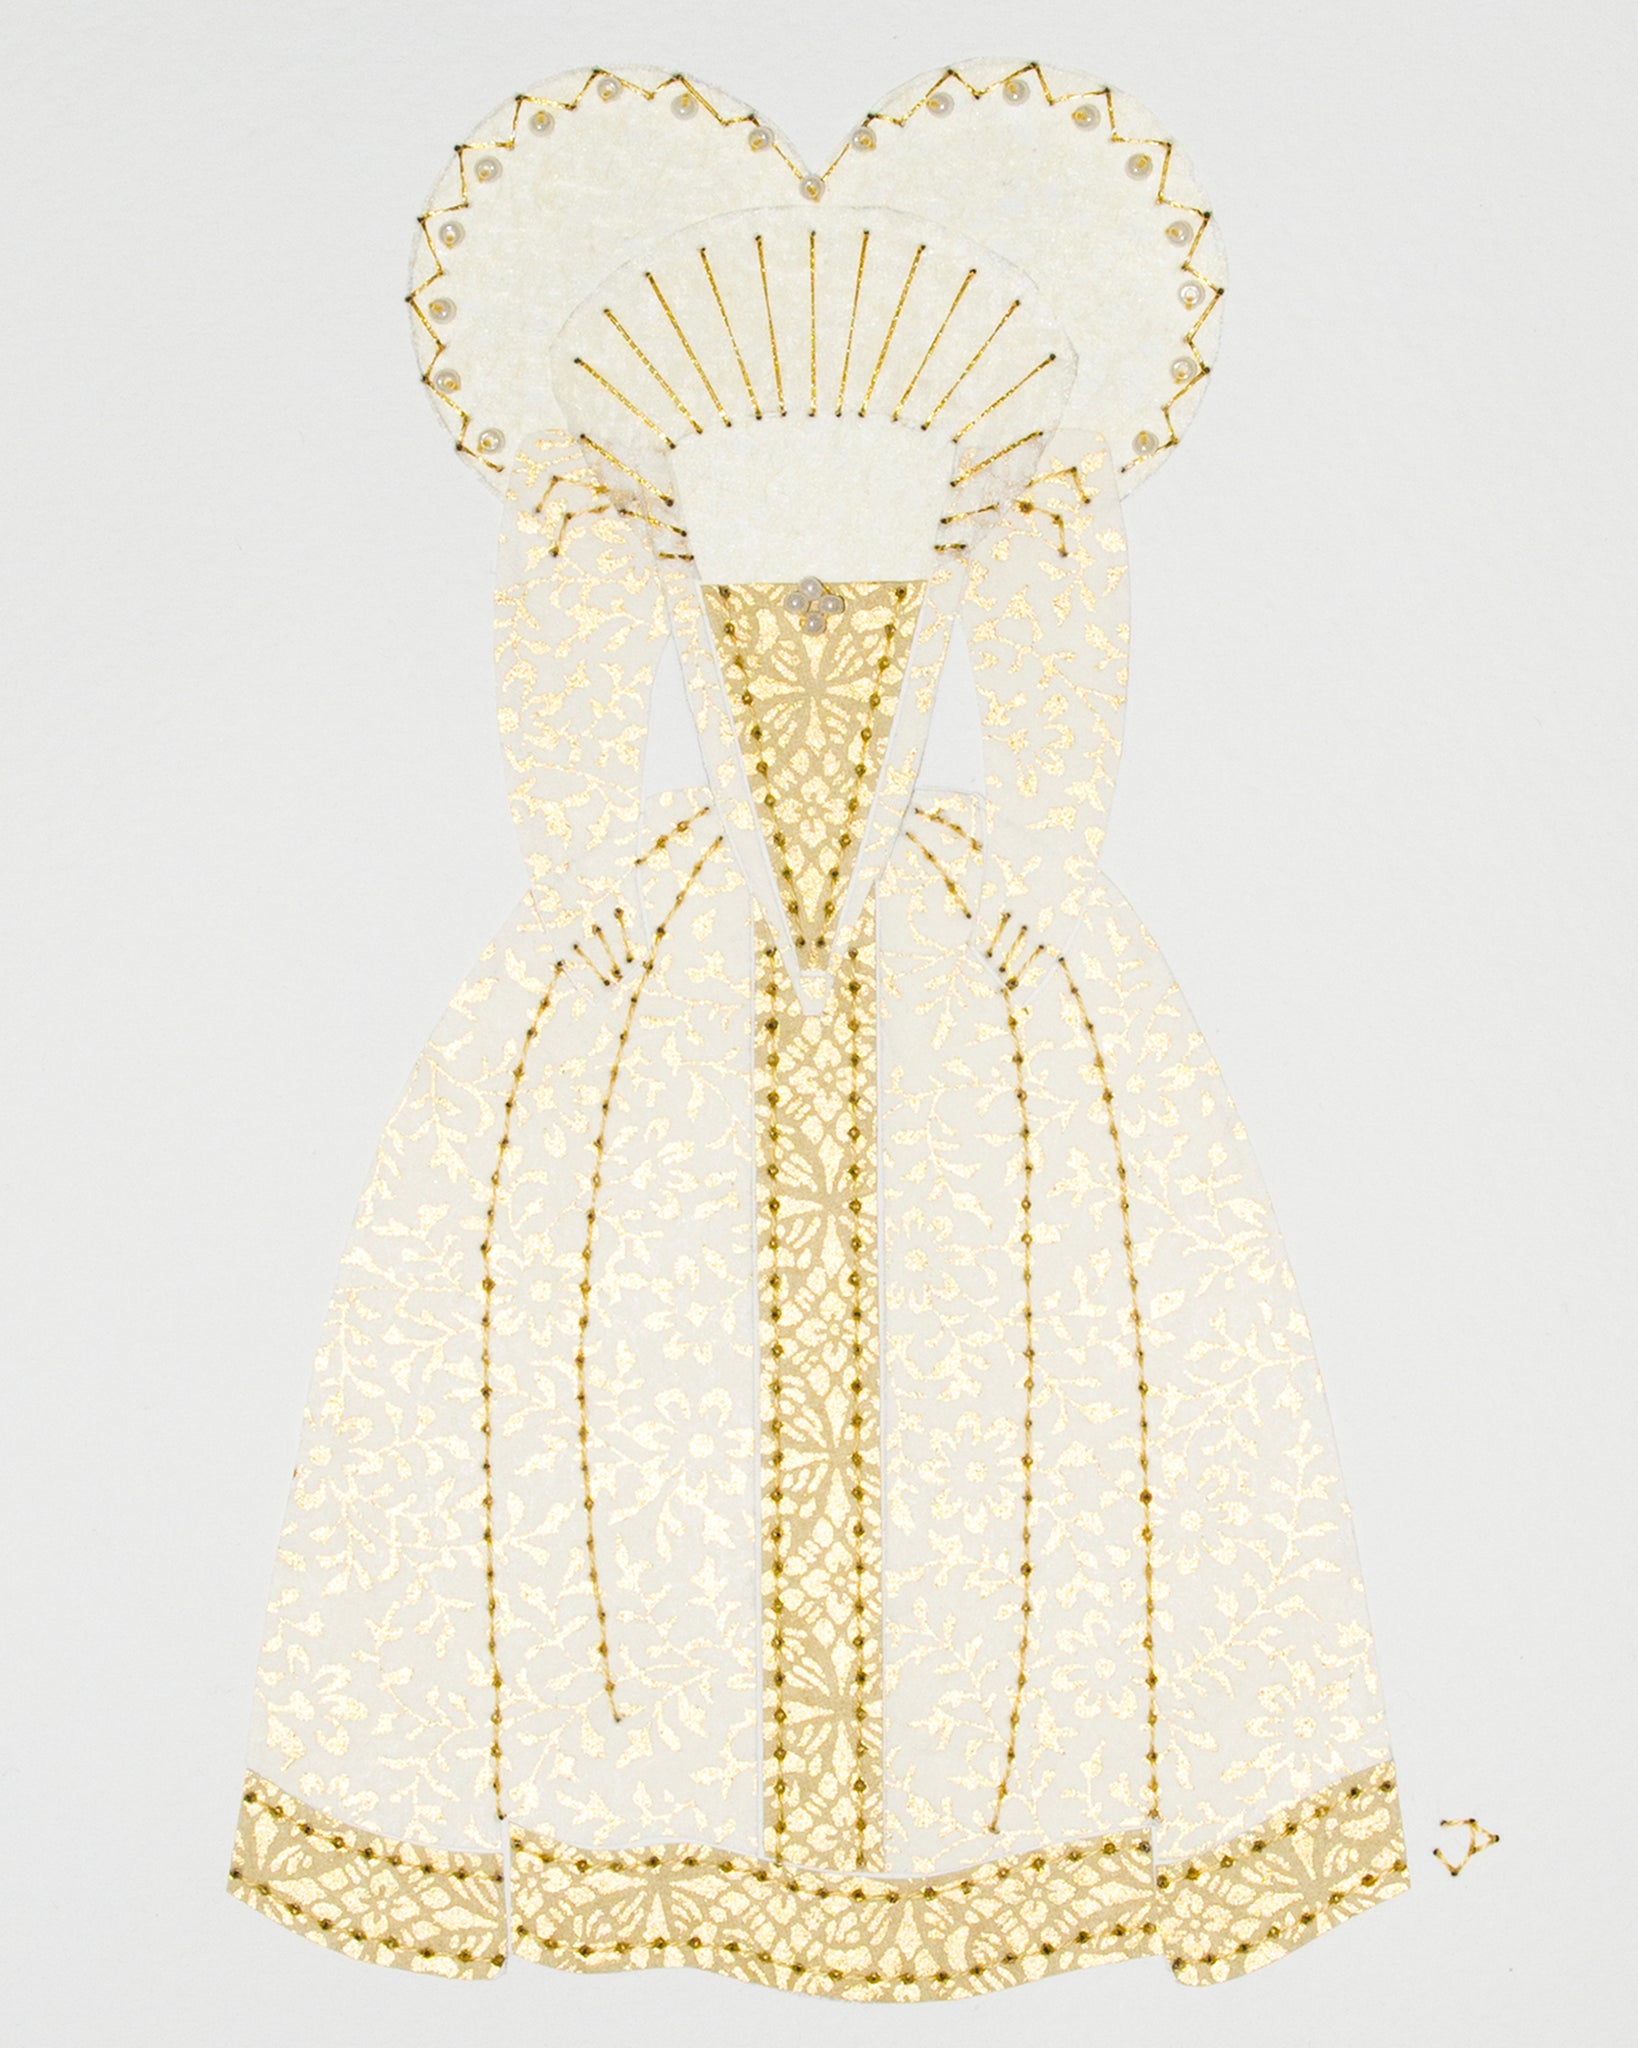 Dress #022: Queen Elizabeth I gown in white and gold: front view. 2014